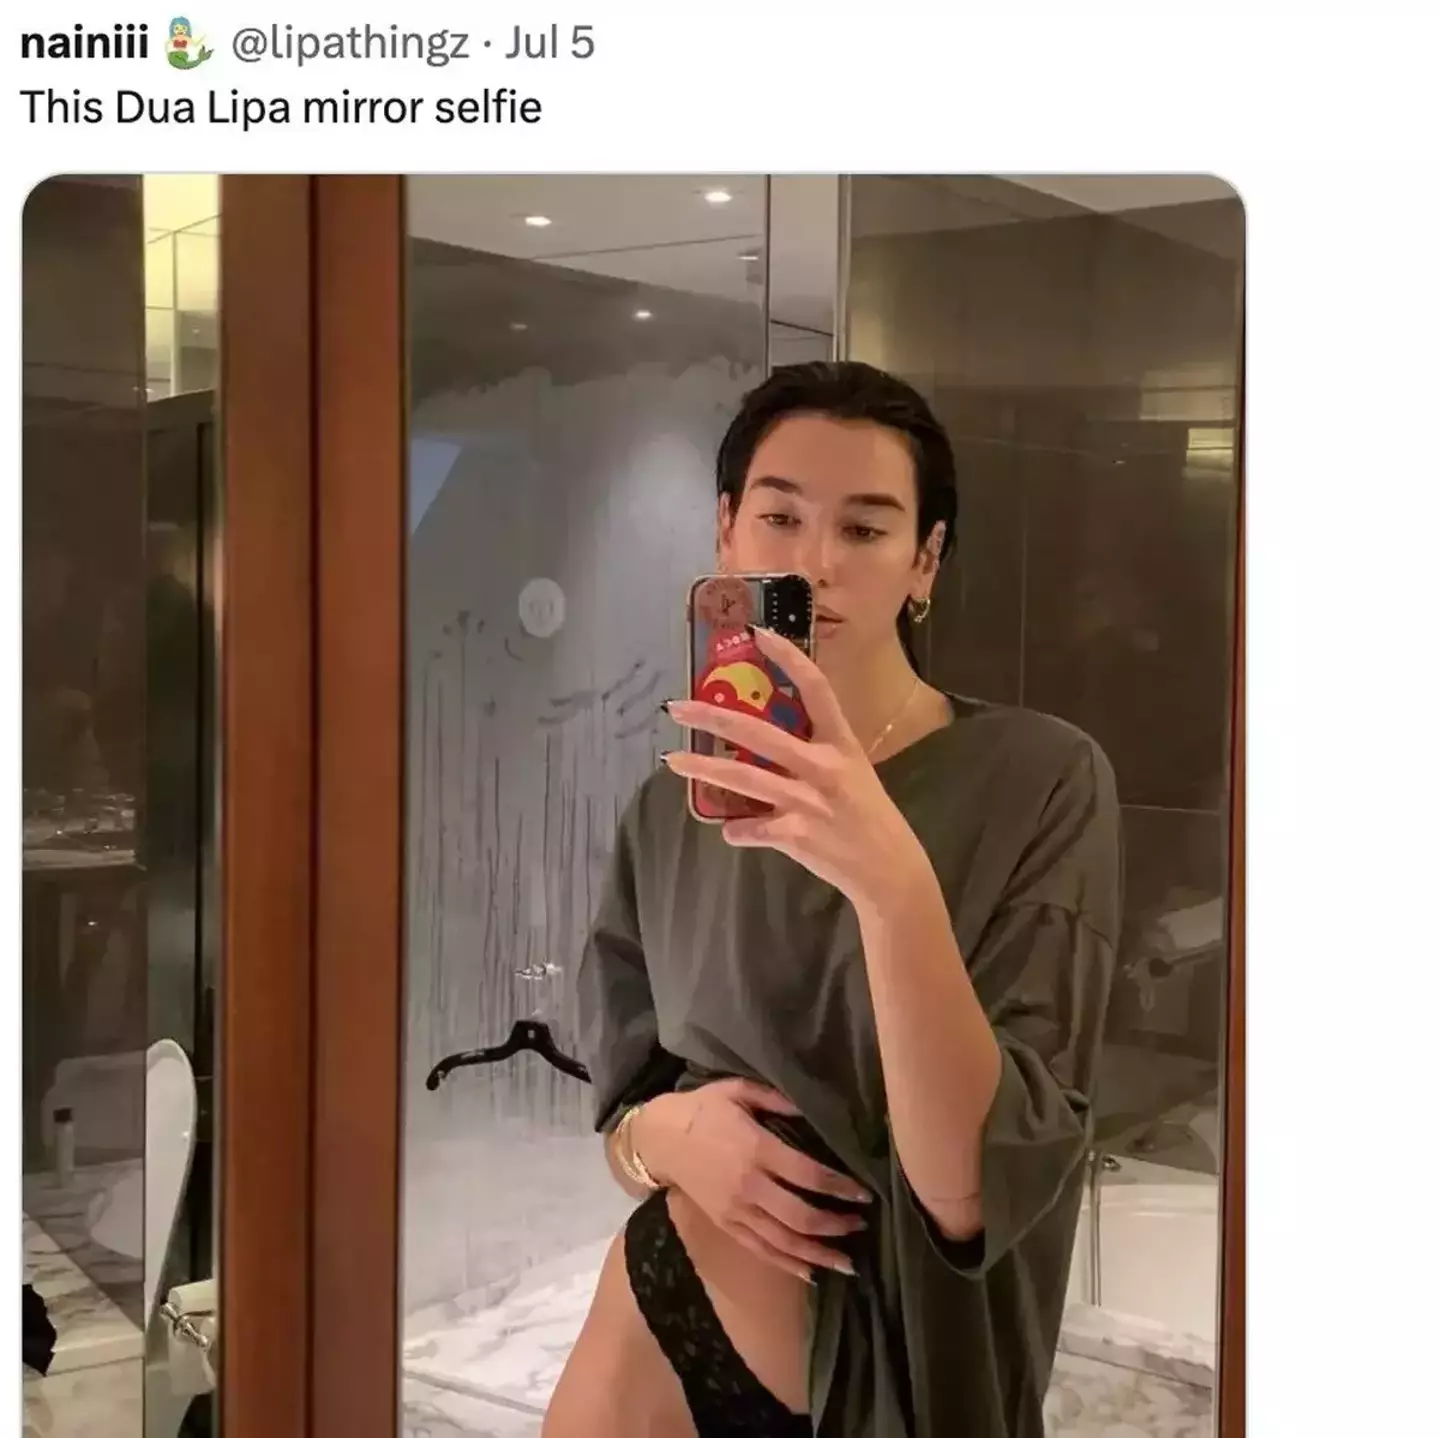 Fans couldn't stop commenting about the 'NSFW detail' in the star's selfie. (Instagram/@dualipa / X/@lipathingz)